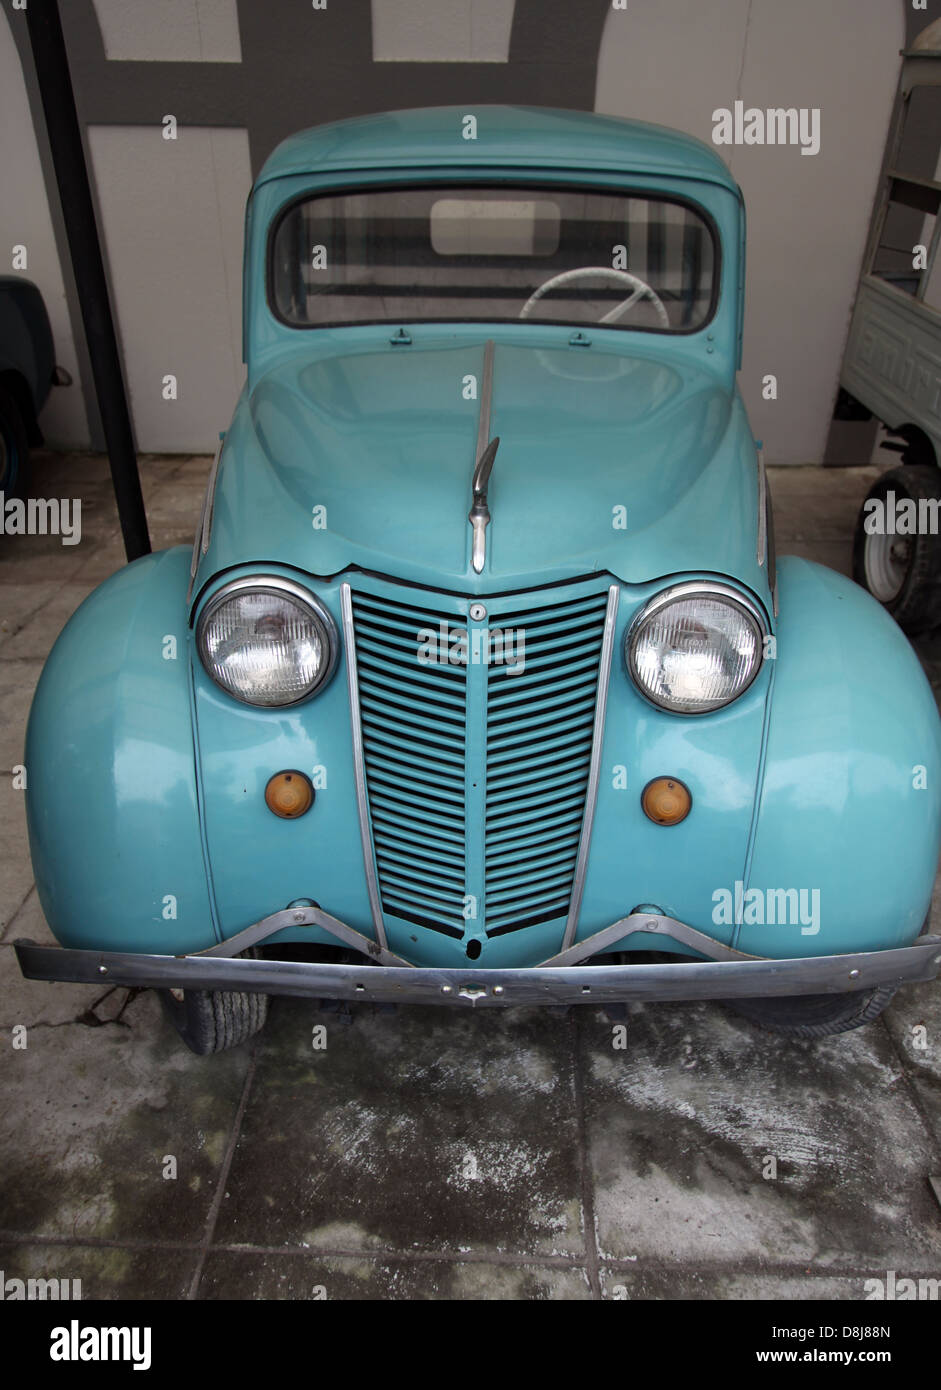 It's a photo of an collection car from France. A Citroen or Peugeot which is parked in a garage or outdoor Stock Photo